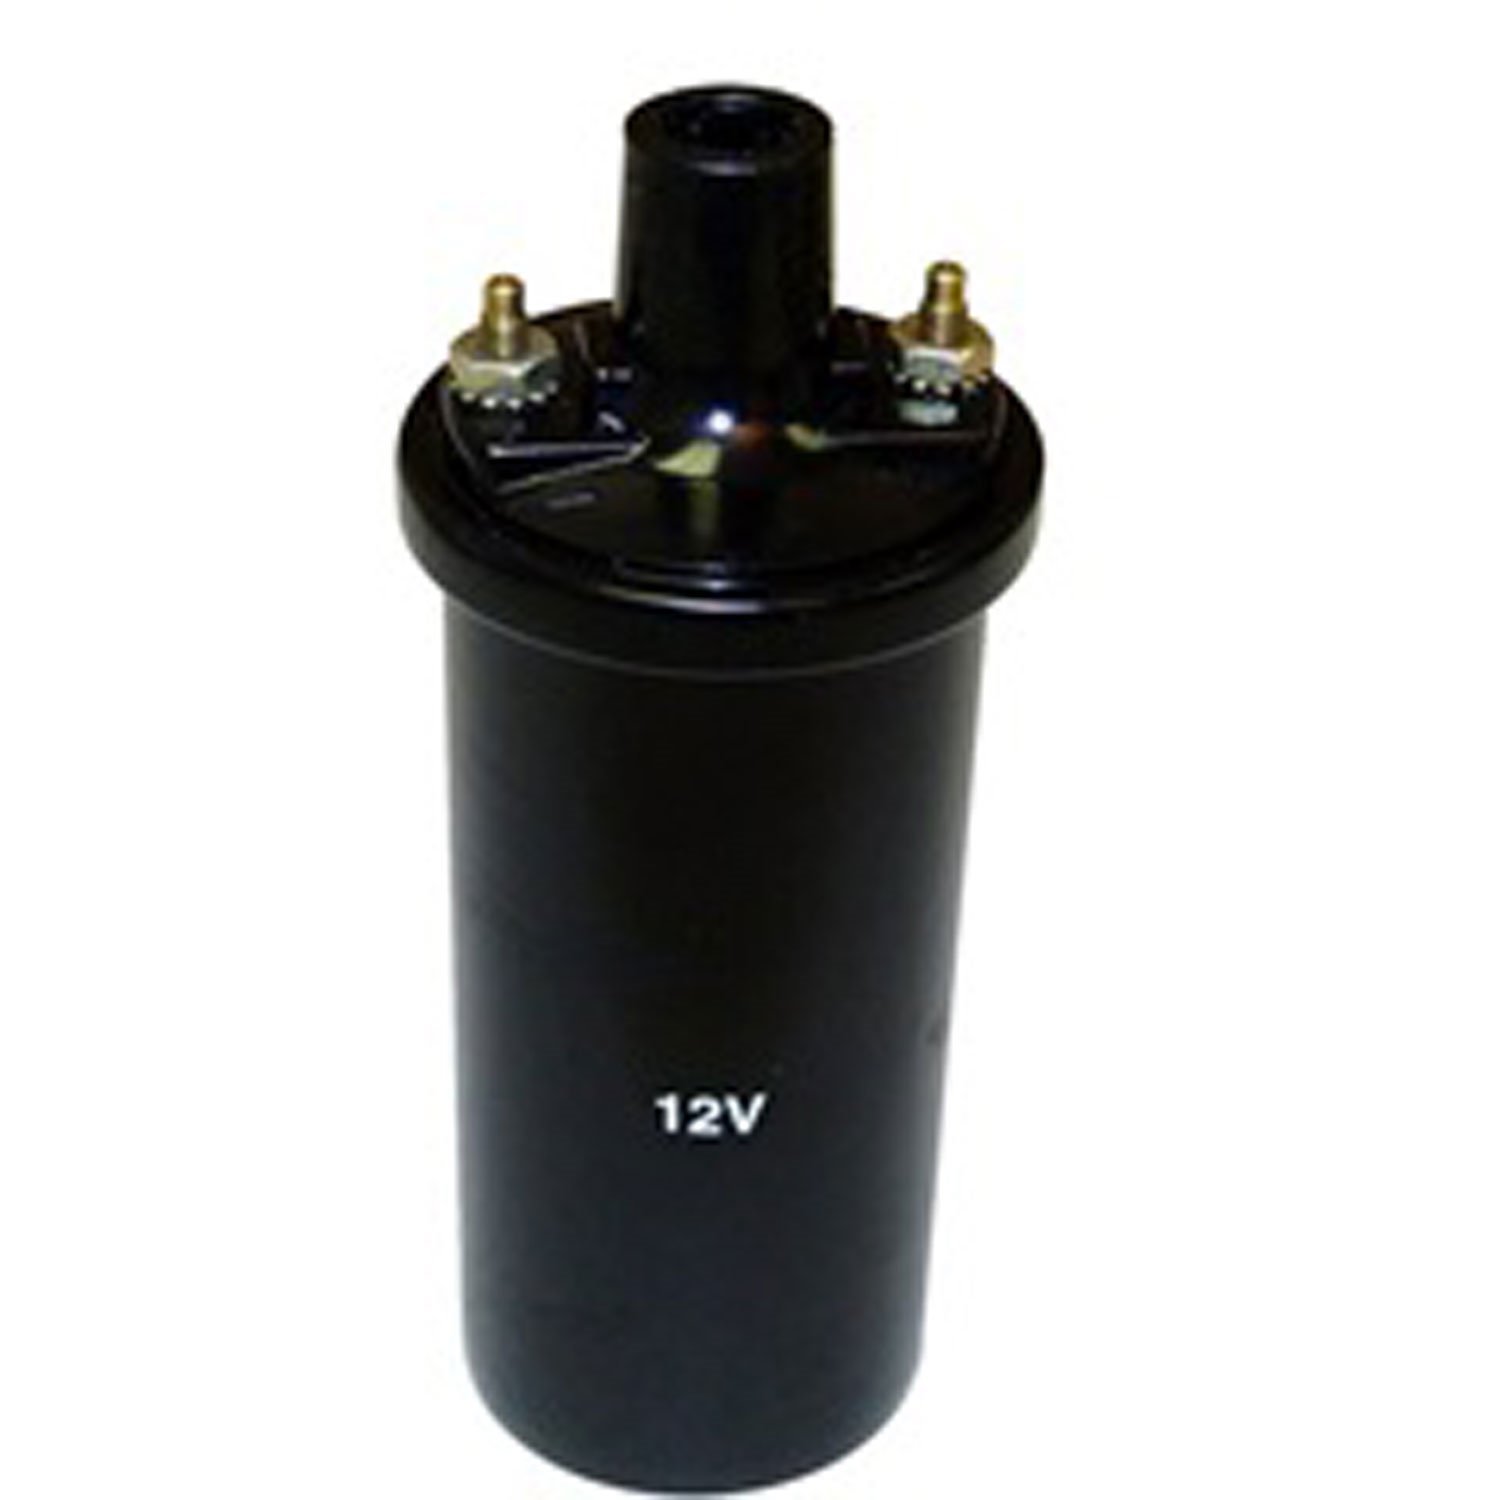 Replacement 12-volt ignition coil with an internal resistor